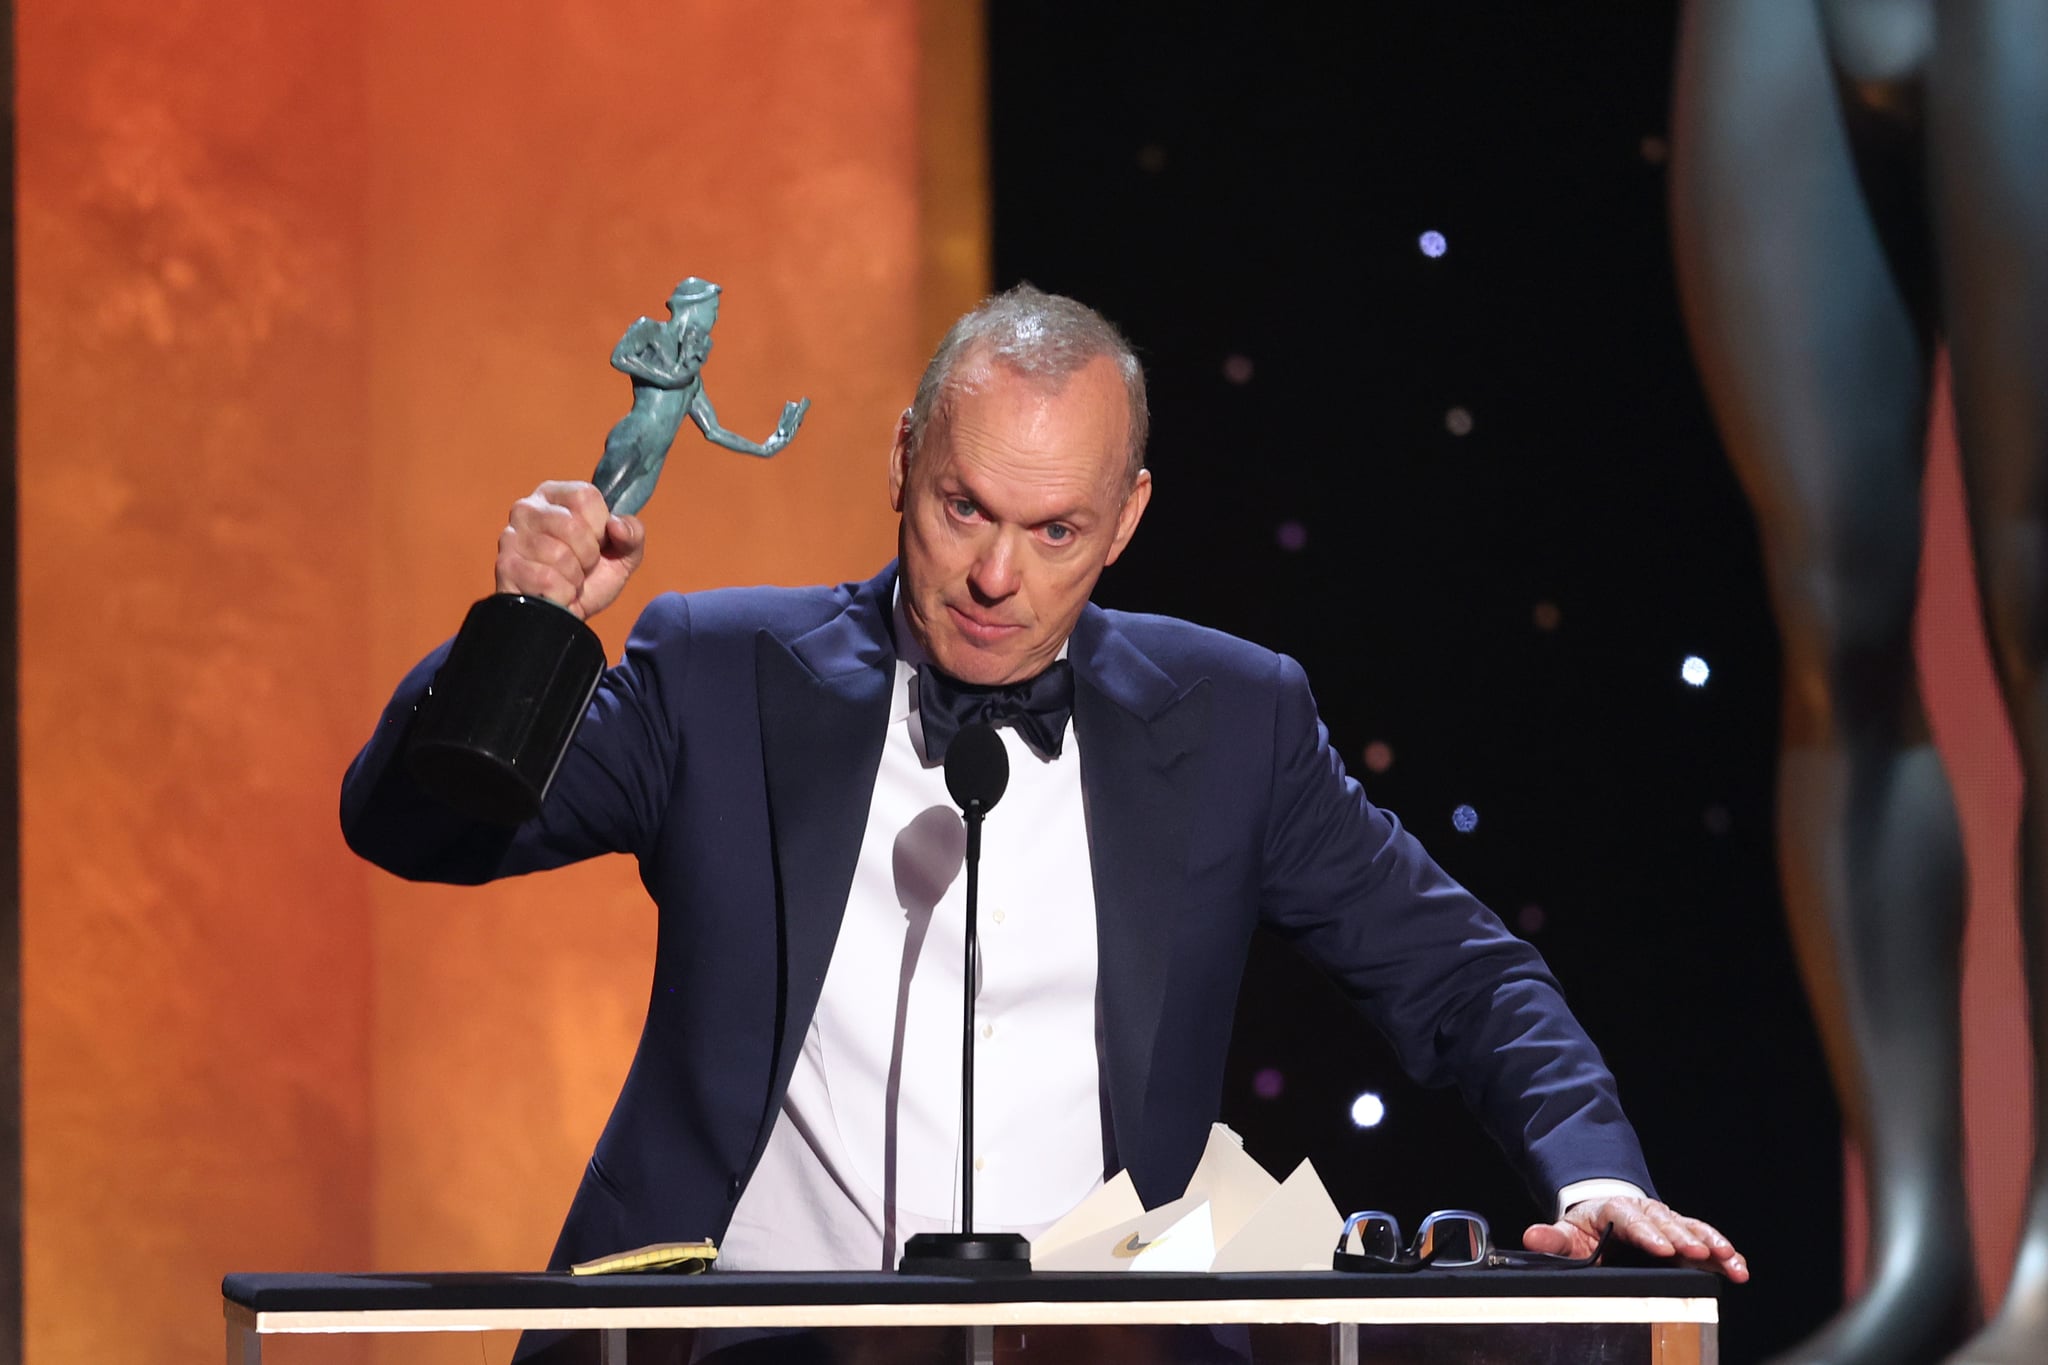 SANTA MONICA, CALIFORNIA - FEBRUARY 27: Michael Keaton accepts Outstanding Performance by a Male Actor in a Television Movie or Limited Series for 'Dopesick' onstage during the 28th Annual Screen Actors Guild Awards at Barker Hangar on February 27, 2022 in Santa Monica, California. (Photo by Rich Fury/Getty Images)